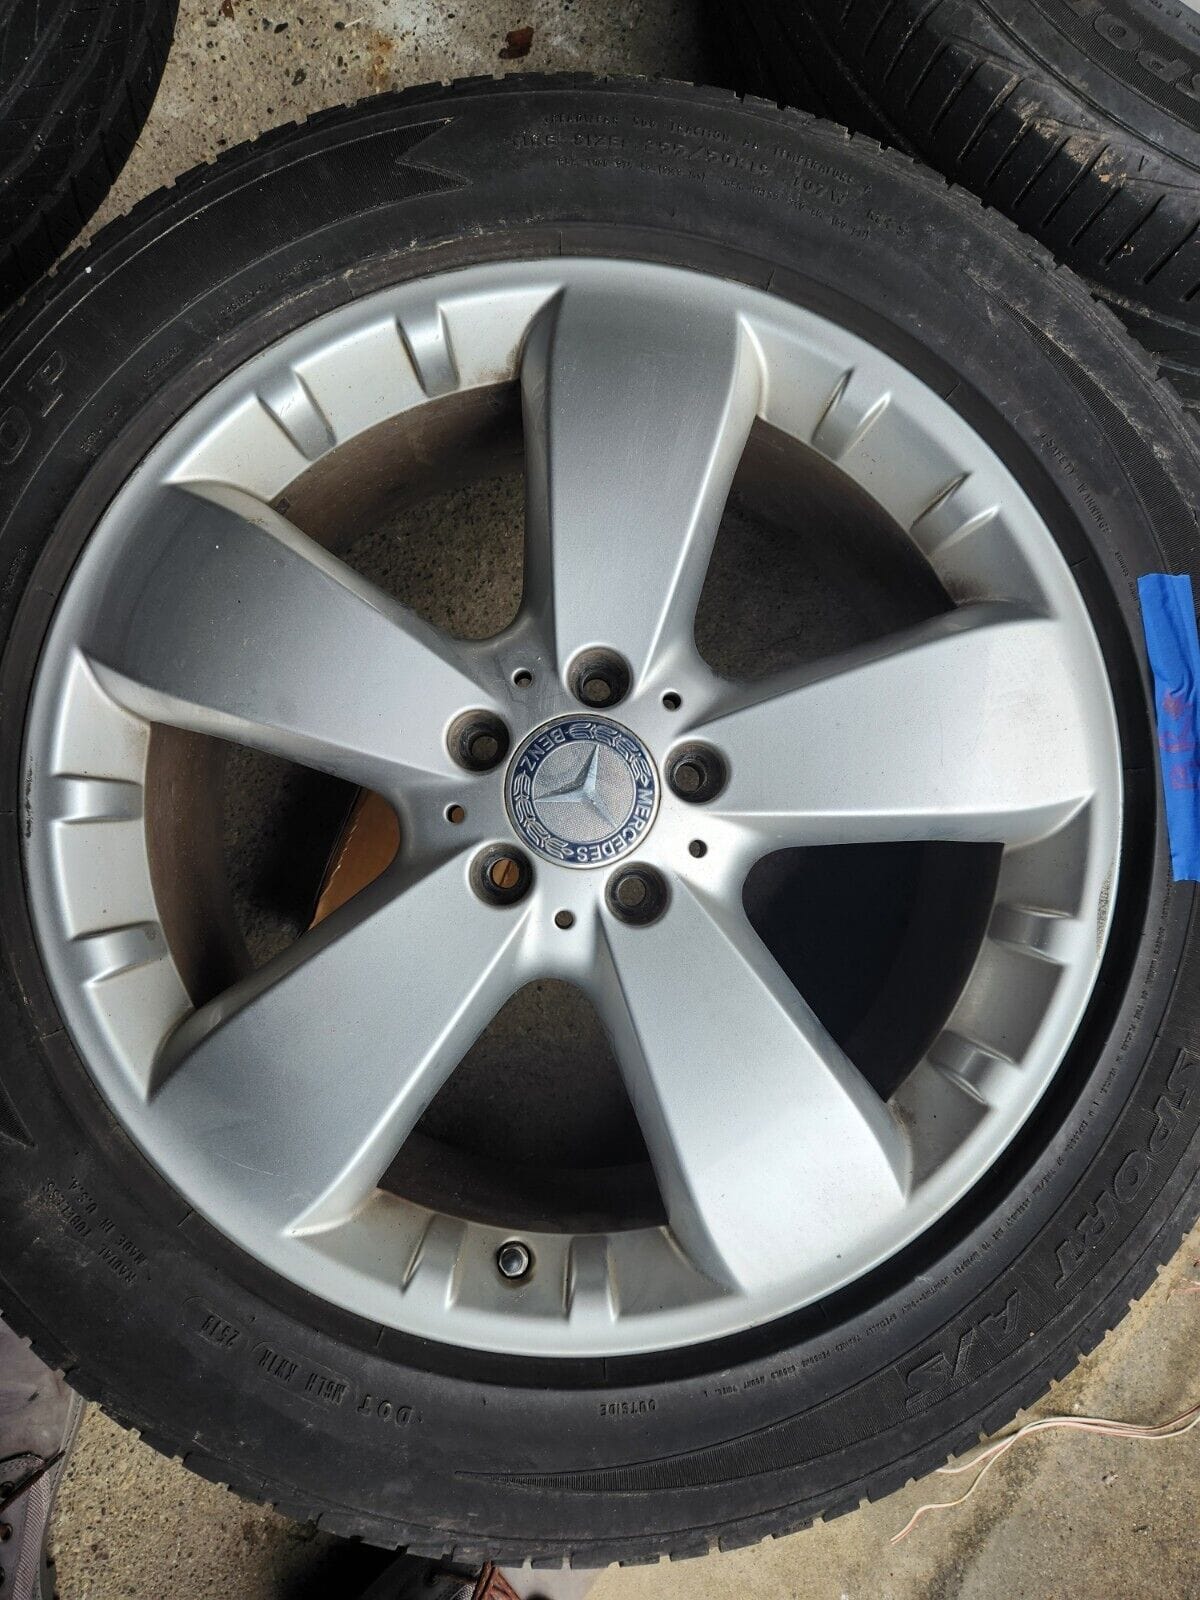 Wheels and Tires/Axles - Mercedes Benz Wheels and tires 19" ML350 W164 OEM Good condition! - Used - 2003 to 2015 Mercedes-Benz ML350 - Sudbury, MA 01776, United States